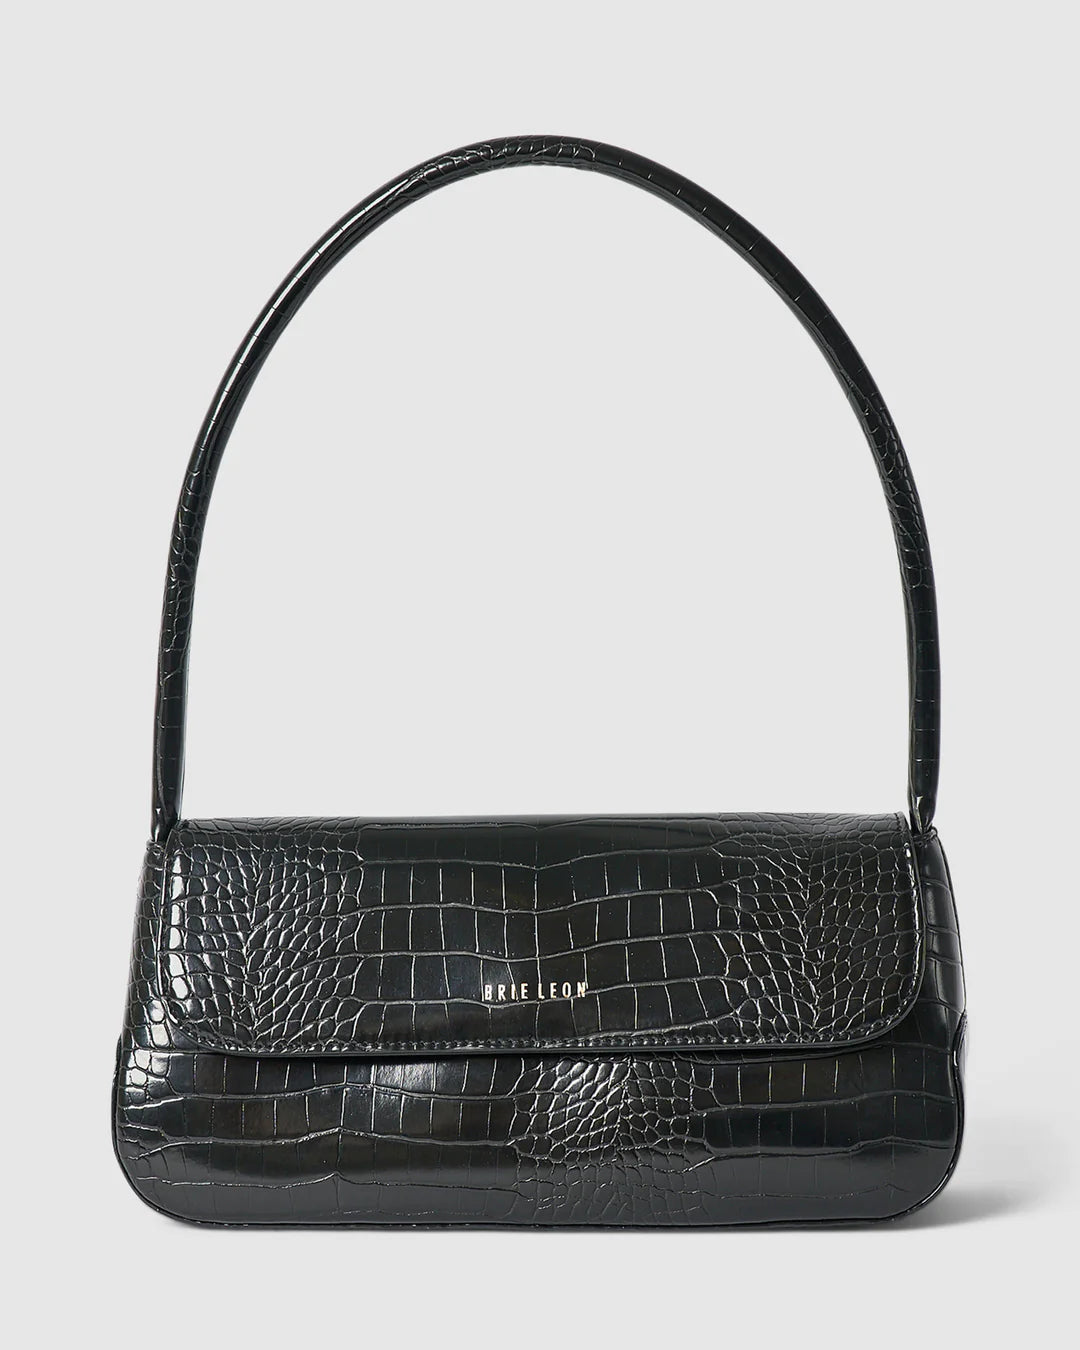 The Camille Bag